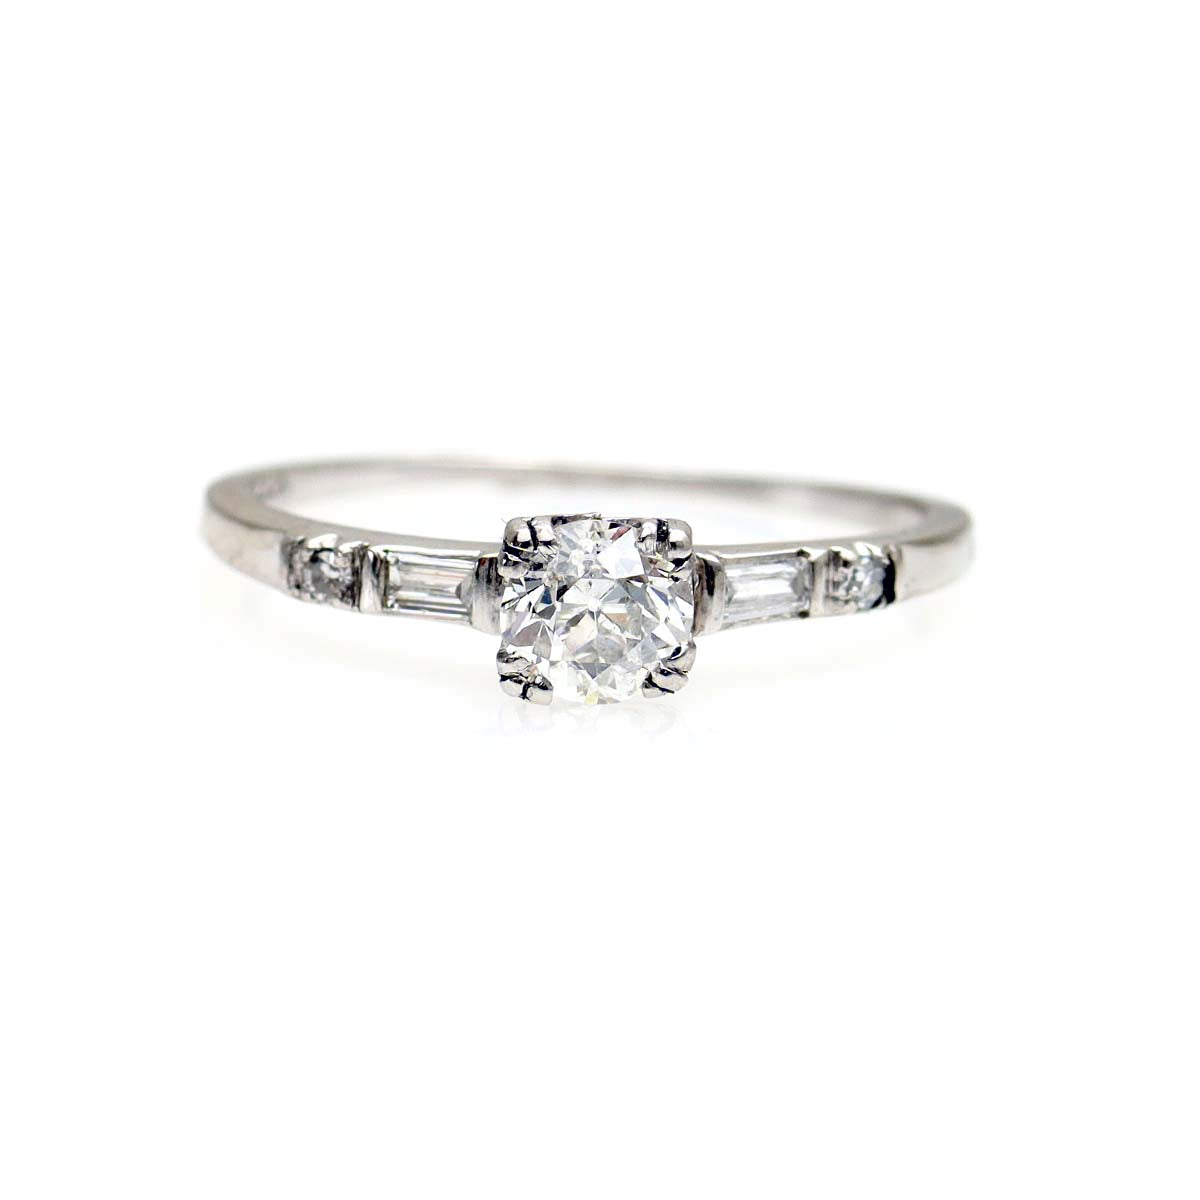 Late Art Deco Engagement Ring #VR220715-2